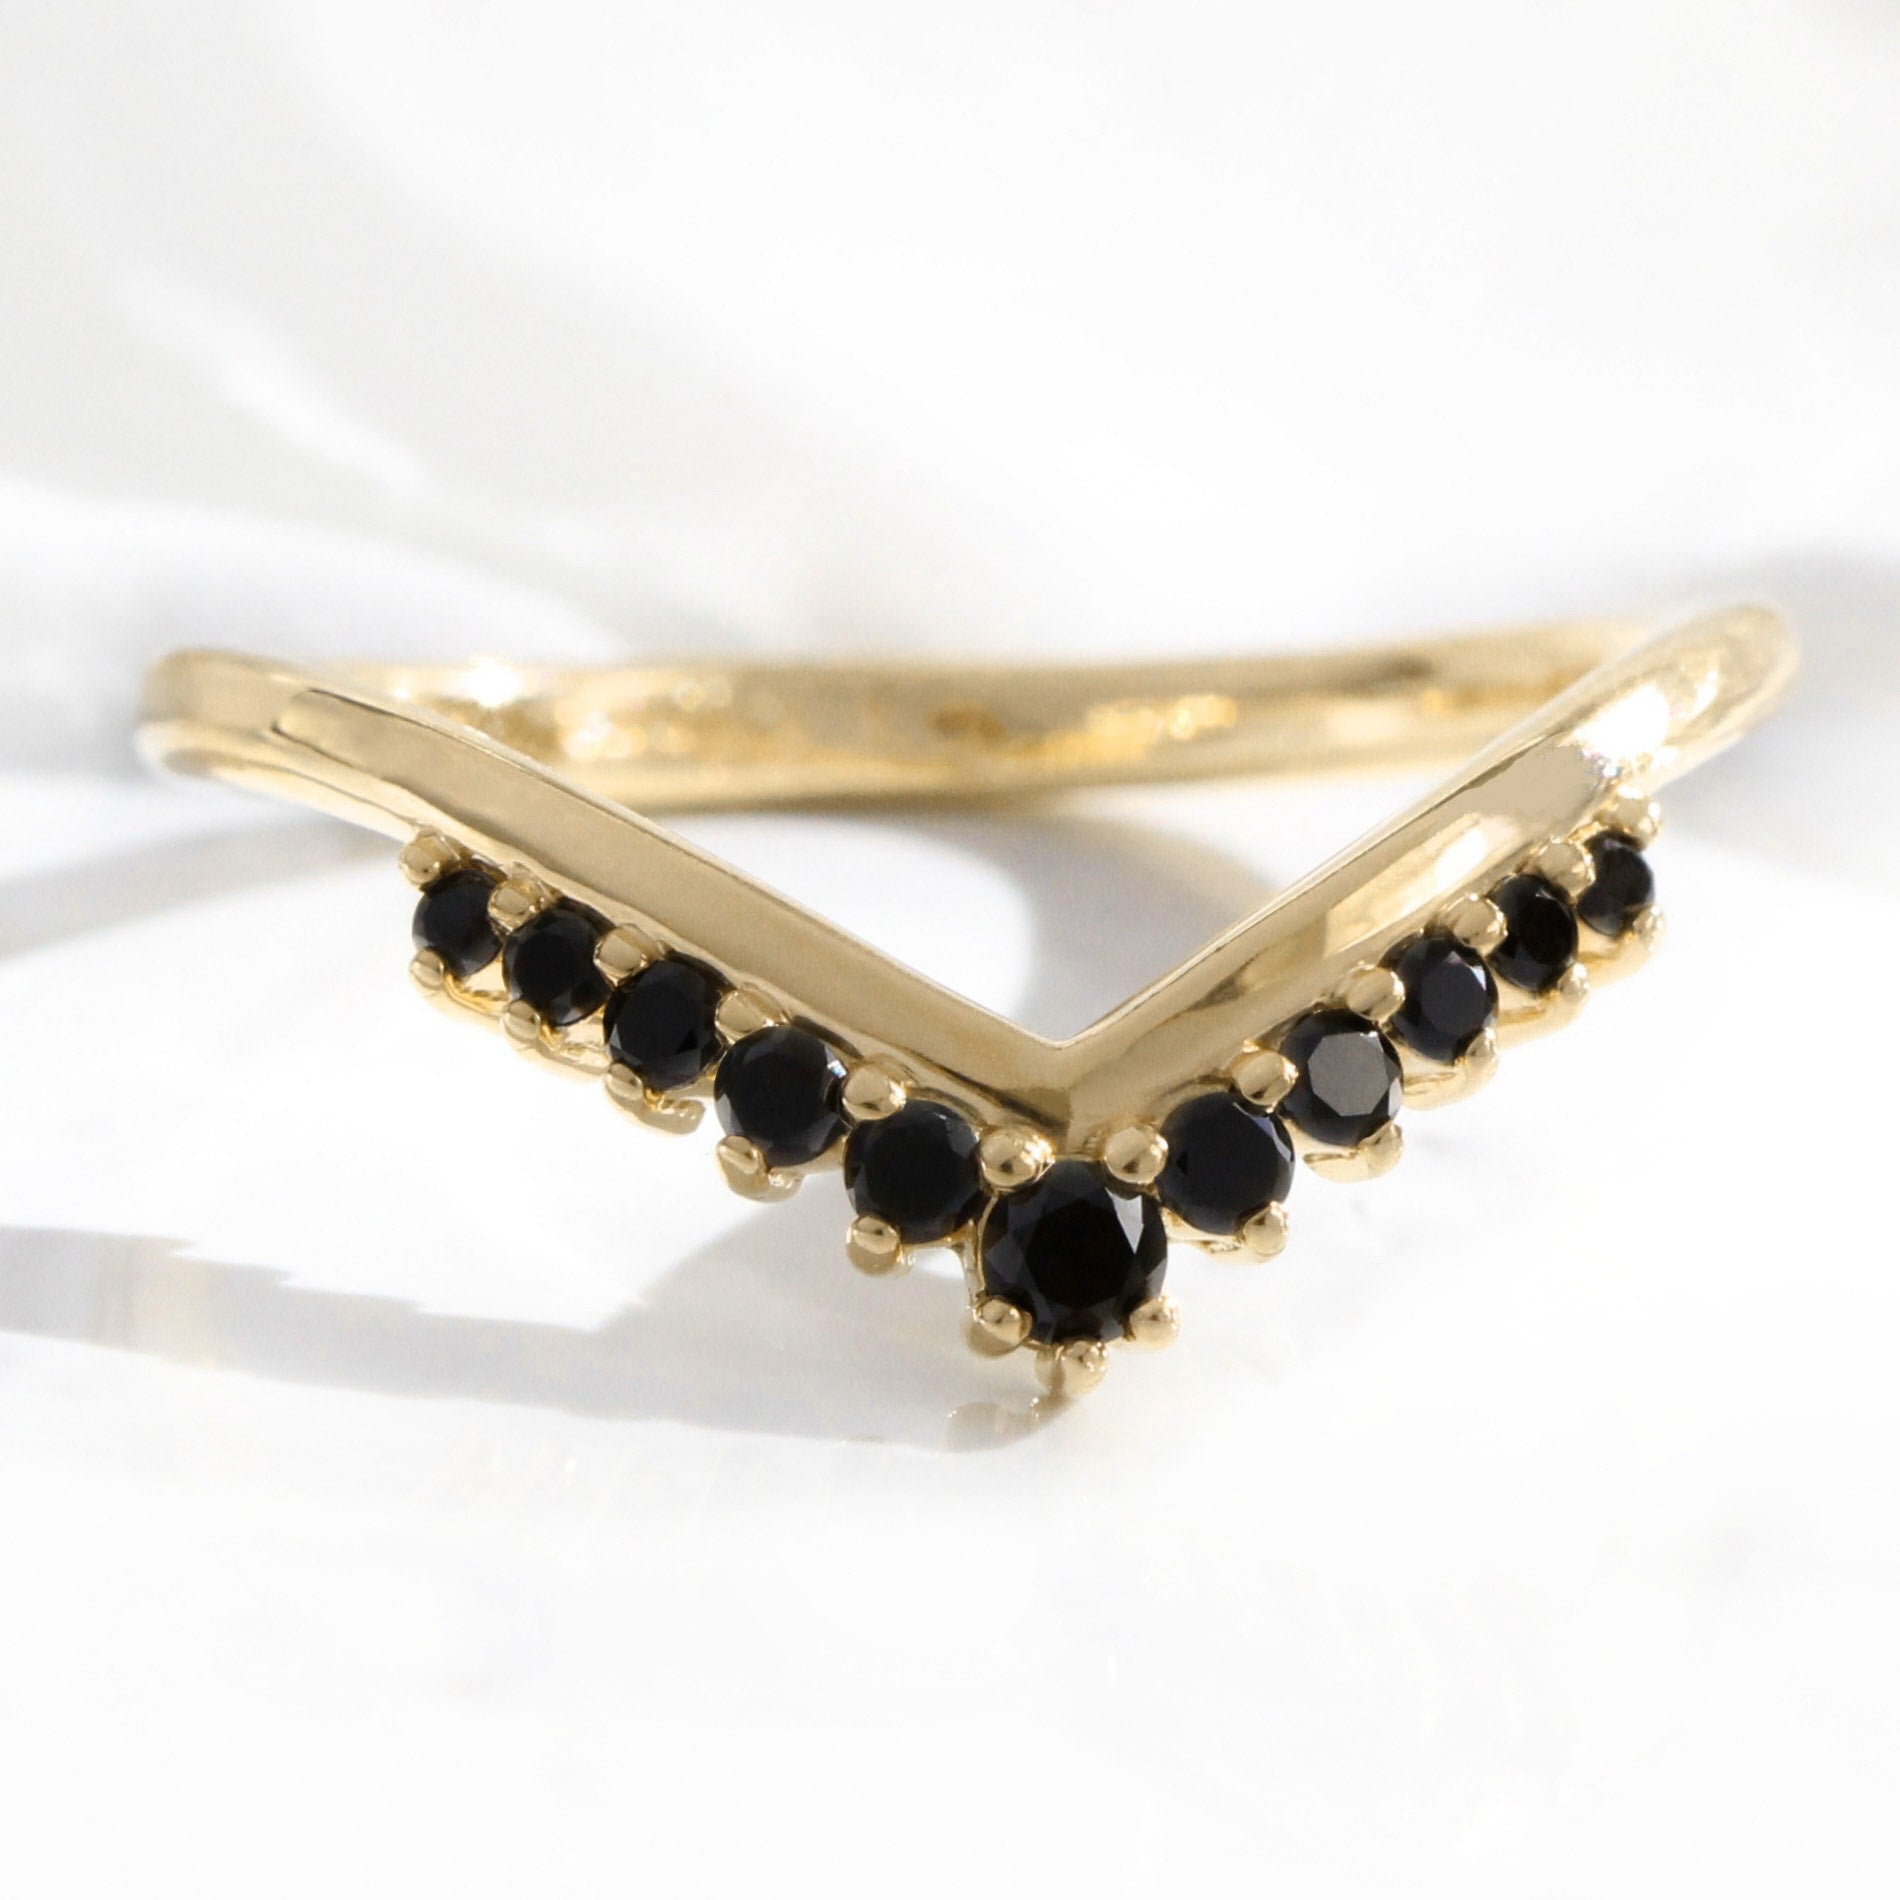 Tiara black diamond wedding ring yellow gold curved V shaped band by la more design jewelry